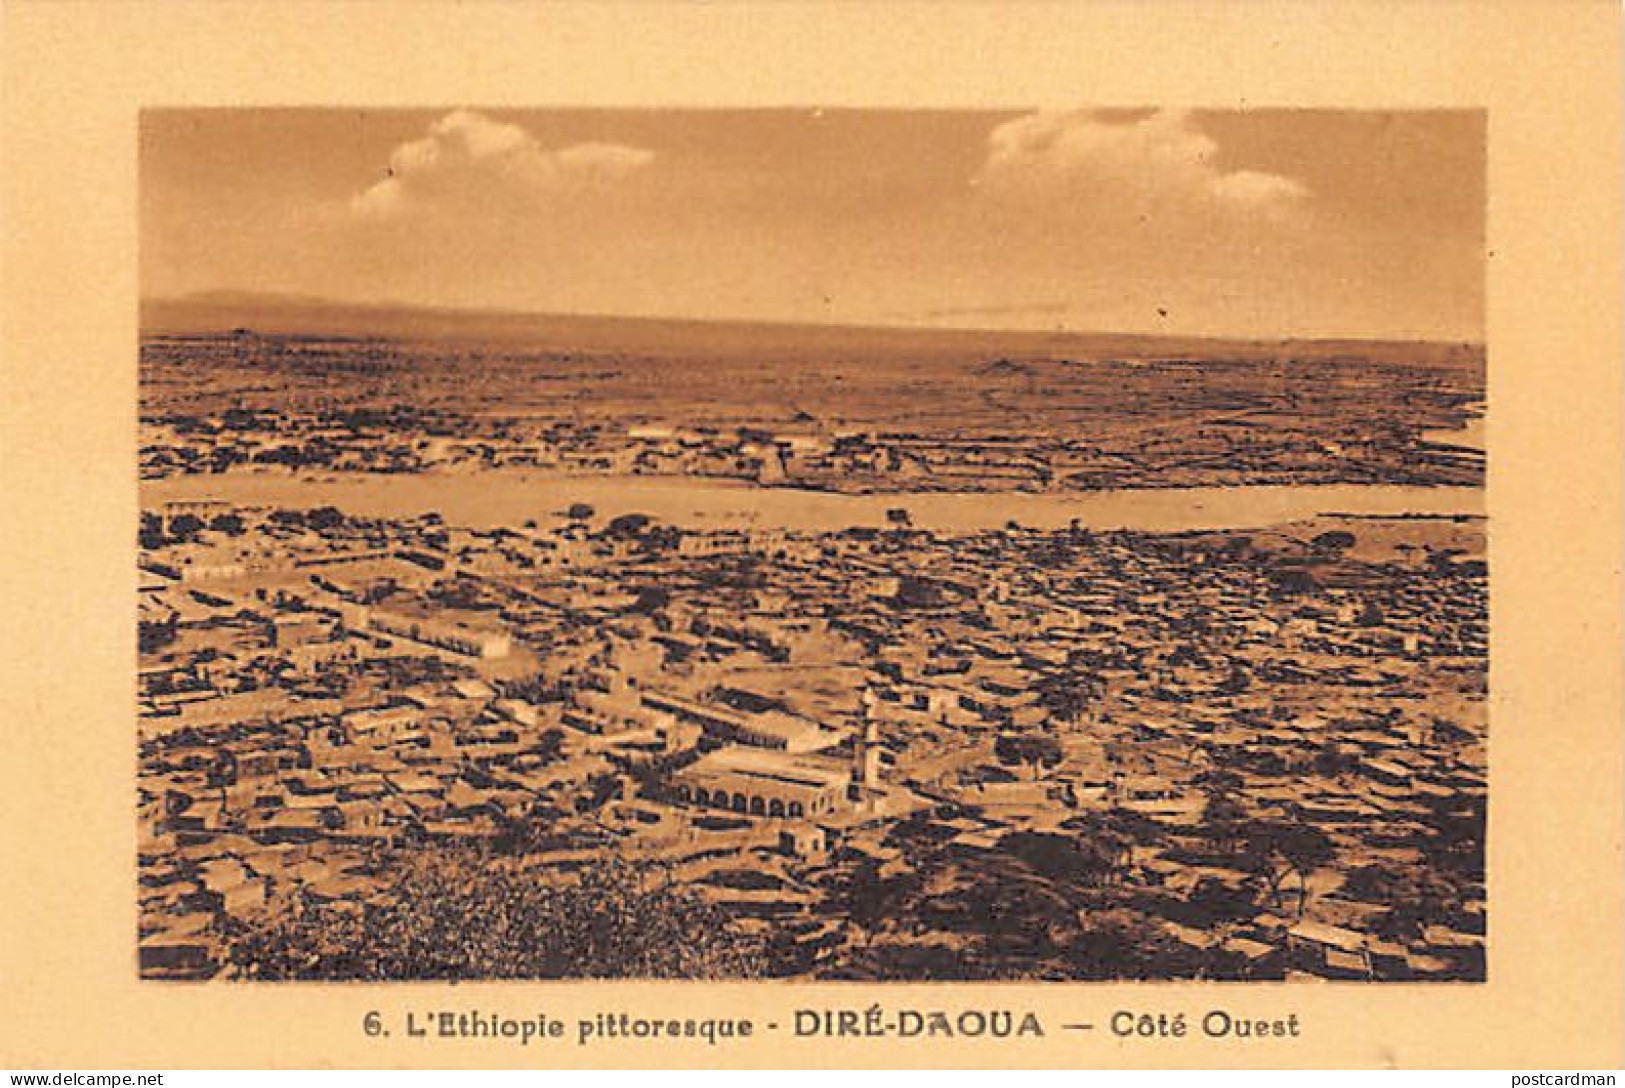 Ethiopia - DIRE DAWA - General View Of The West Side - Publ. Printing Works Of The Dire Dawa Catholic Mission - Photogra - Ethiopië